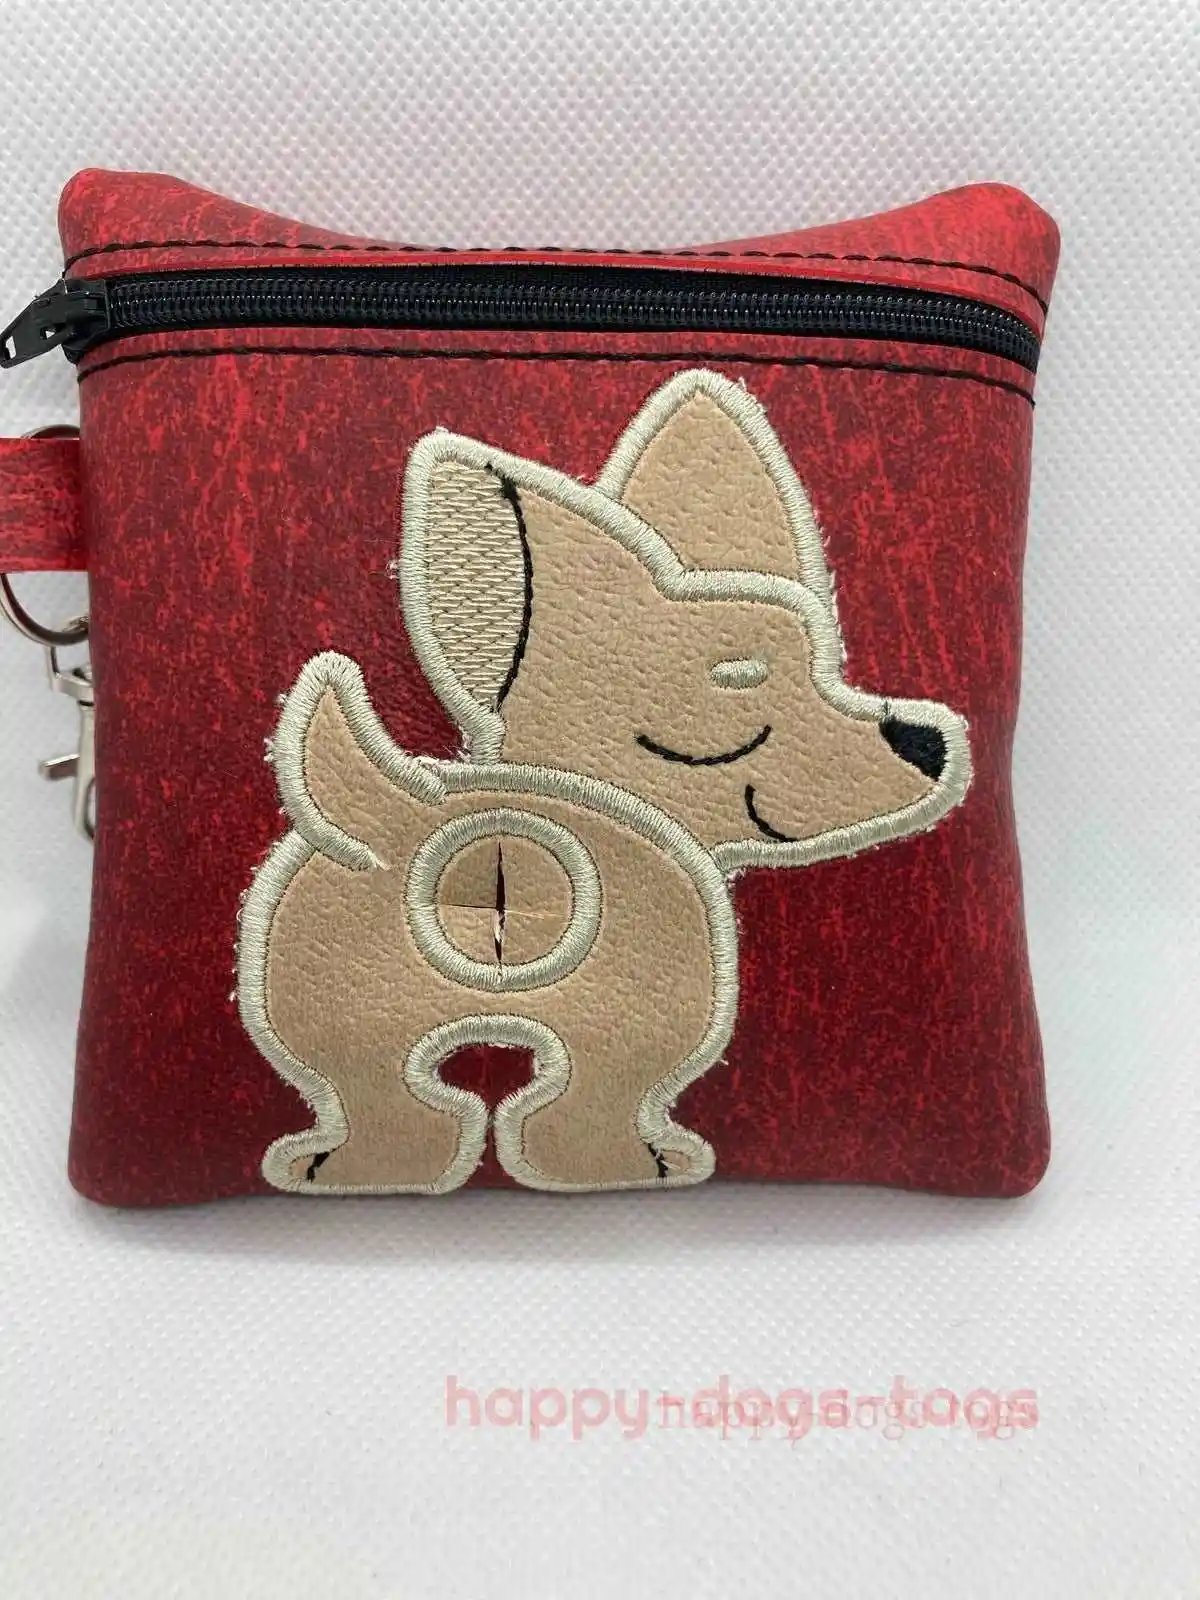 Embroidered Red  Chihuahua Dog poo bag dispenser